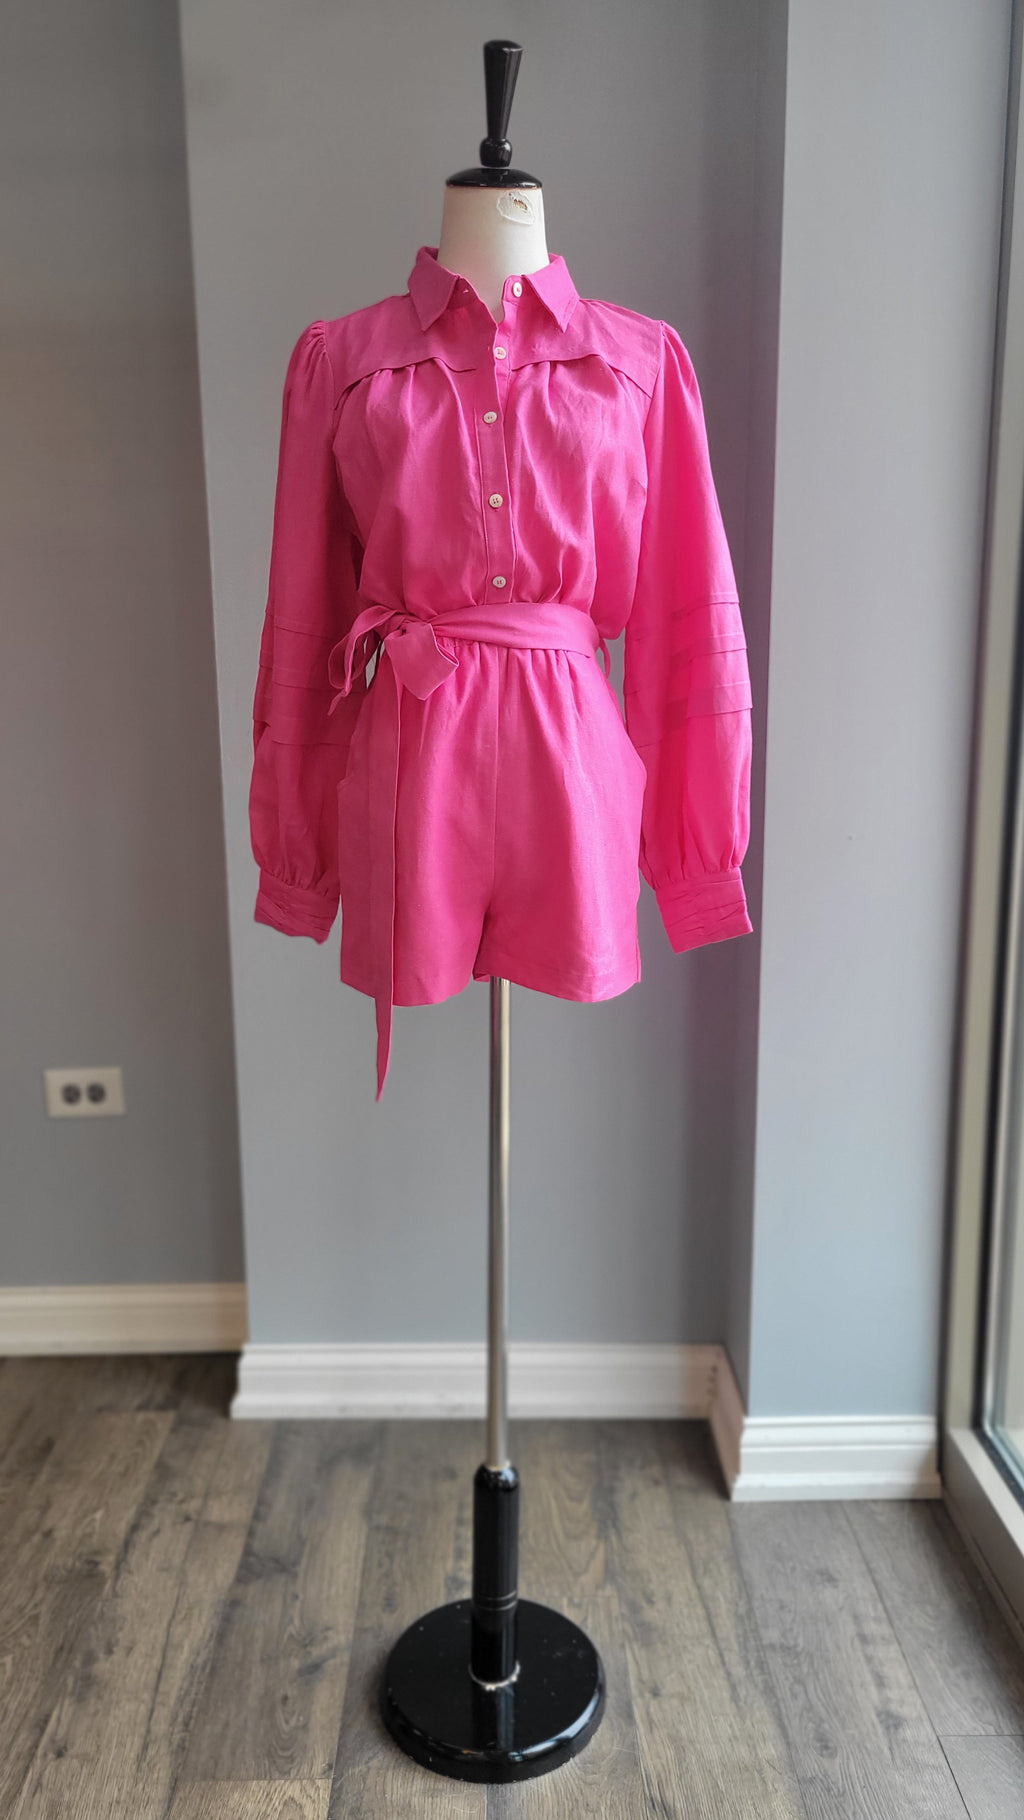 FUCHSIA PINK ROMPER WITH SIDE POCKETS